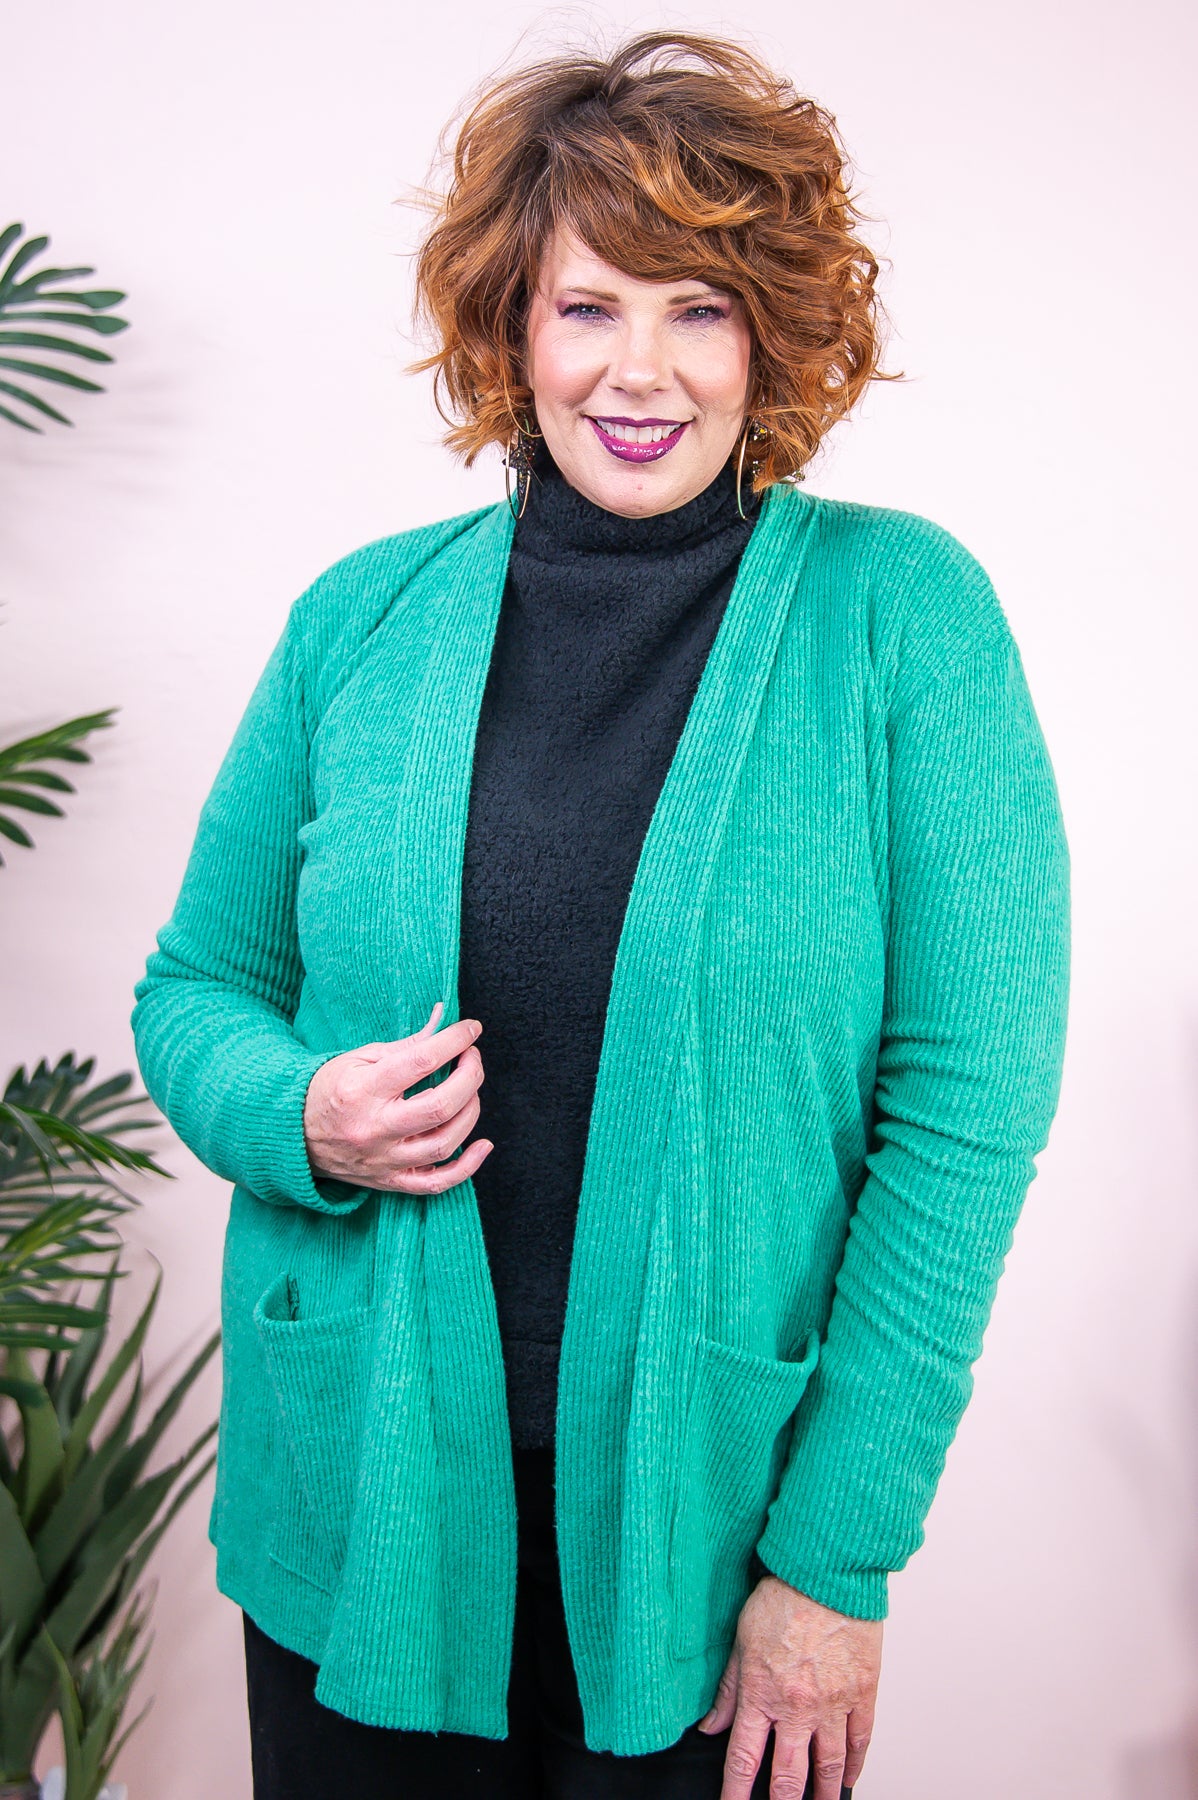 Taking The Easy Route Kelly Green Solid Ribbed Cardigan - O5270KGN